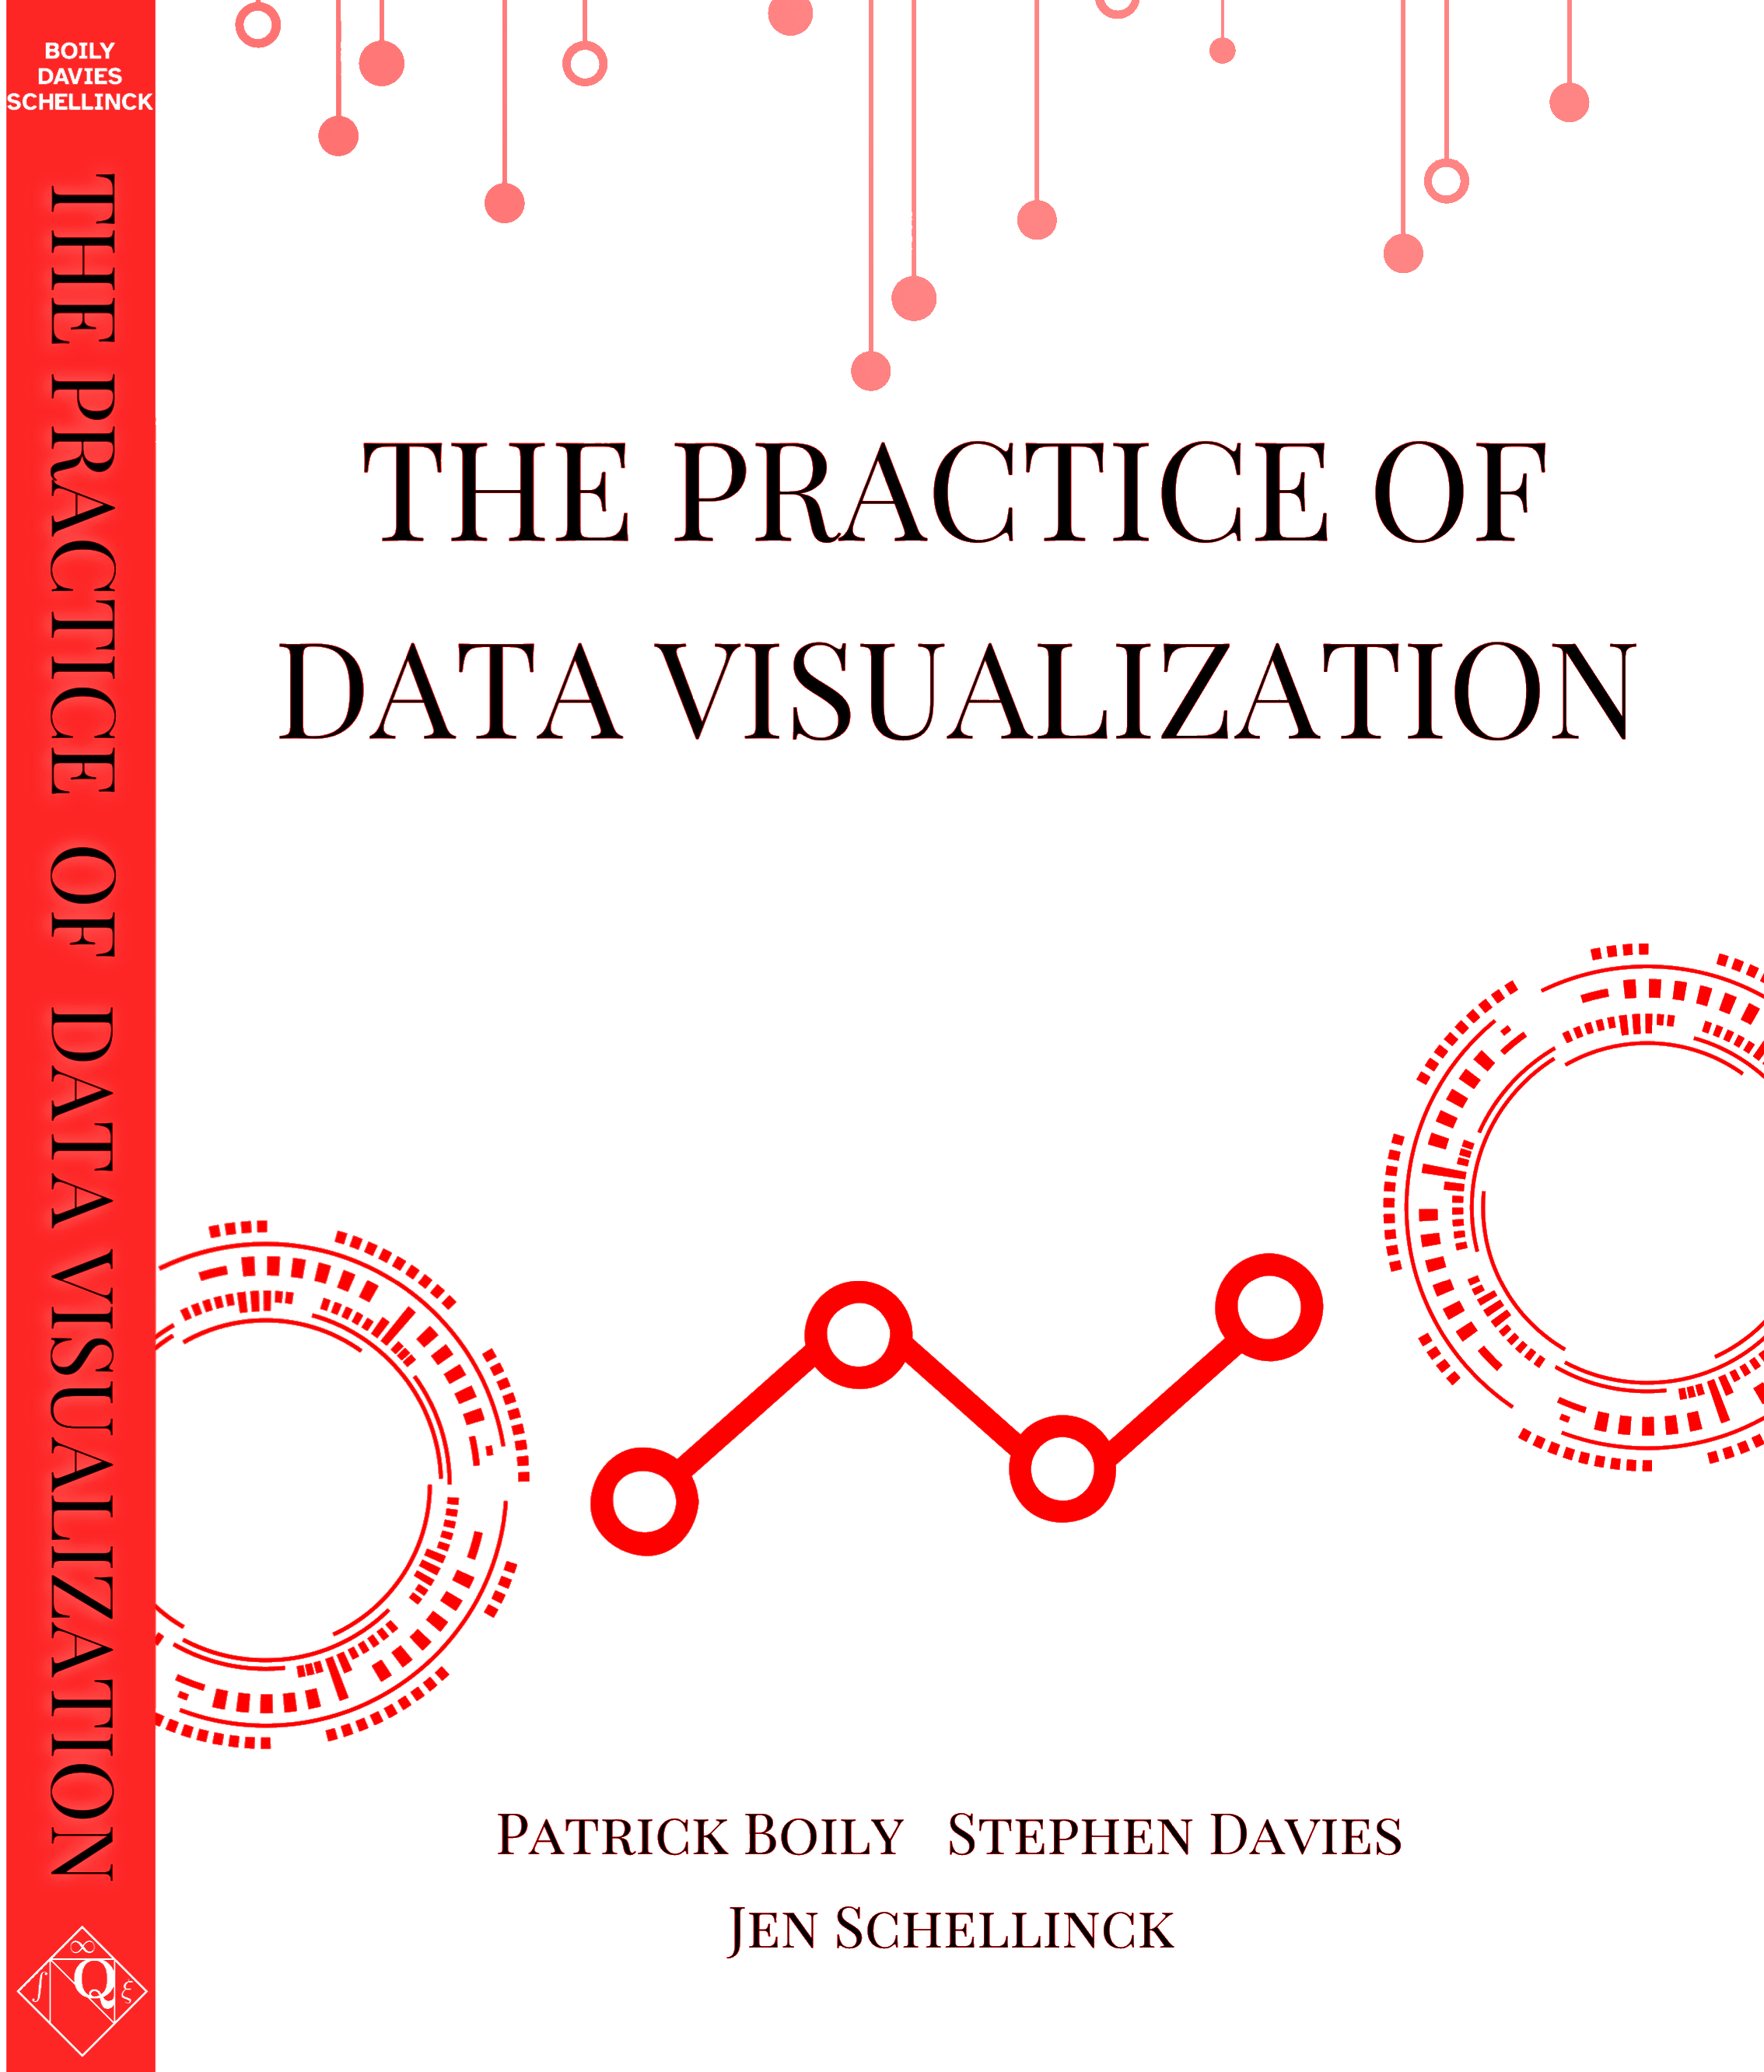 The Practice of Data Visualization